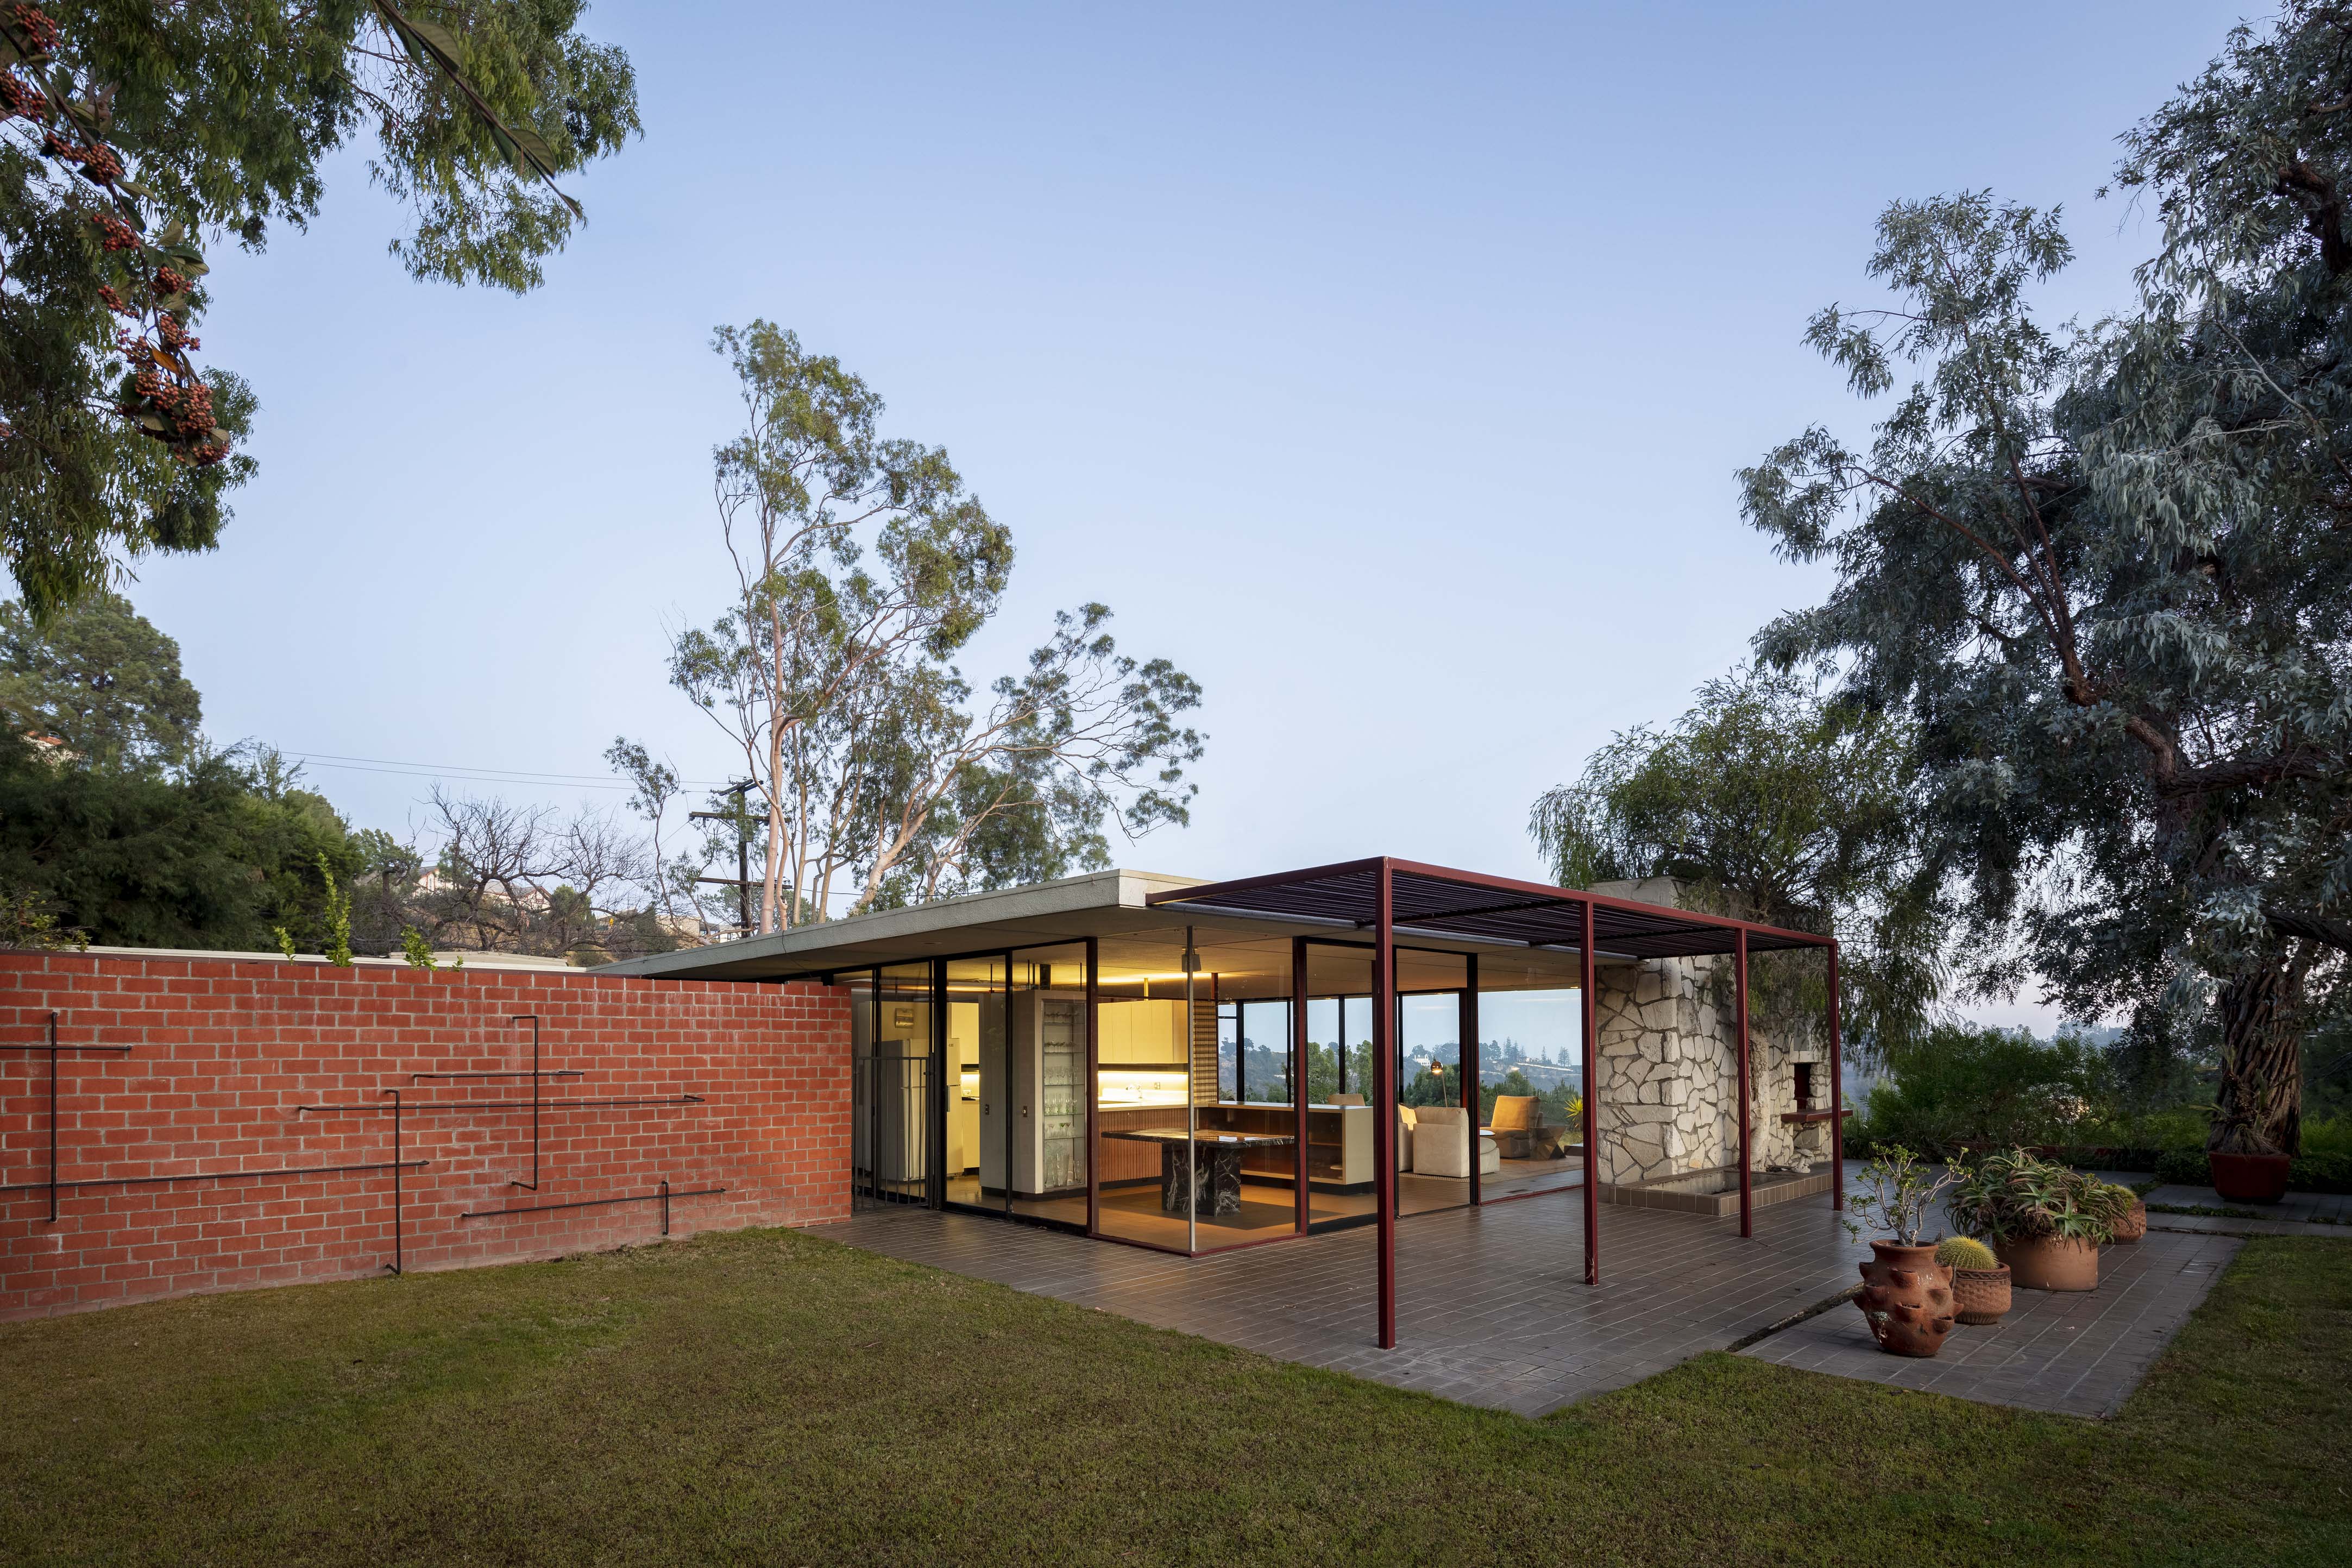 Case Study Houses: An In depth Look At Mid Century Architectural Gems